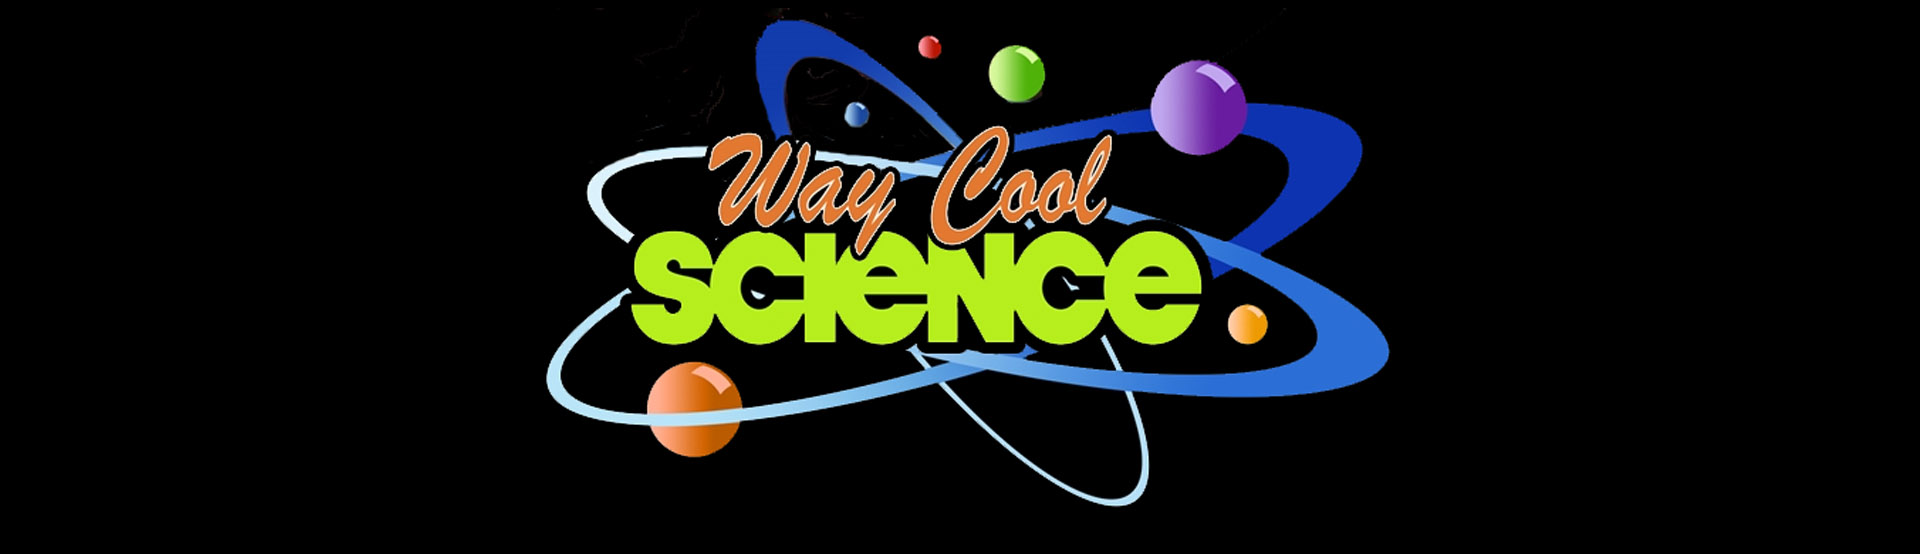 Way Cool Science